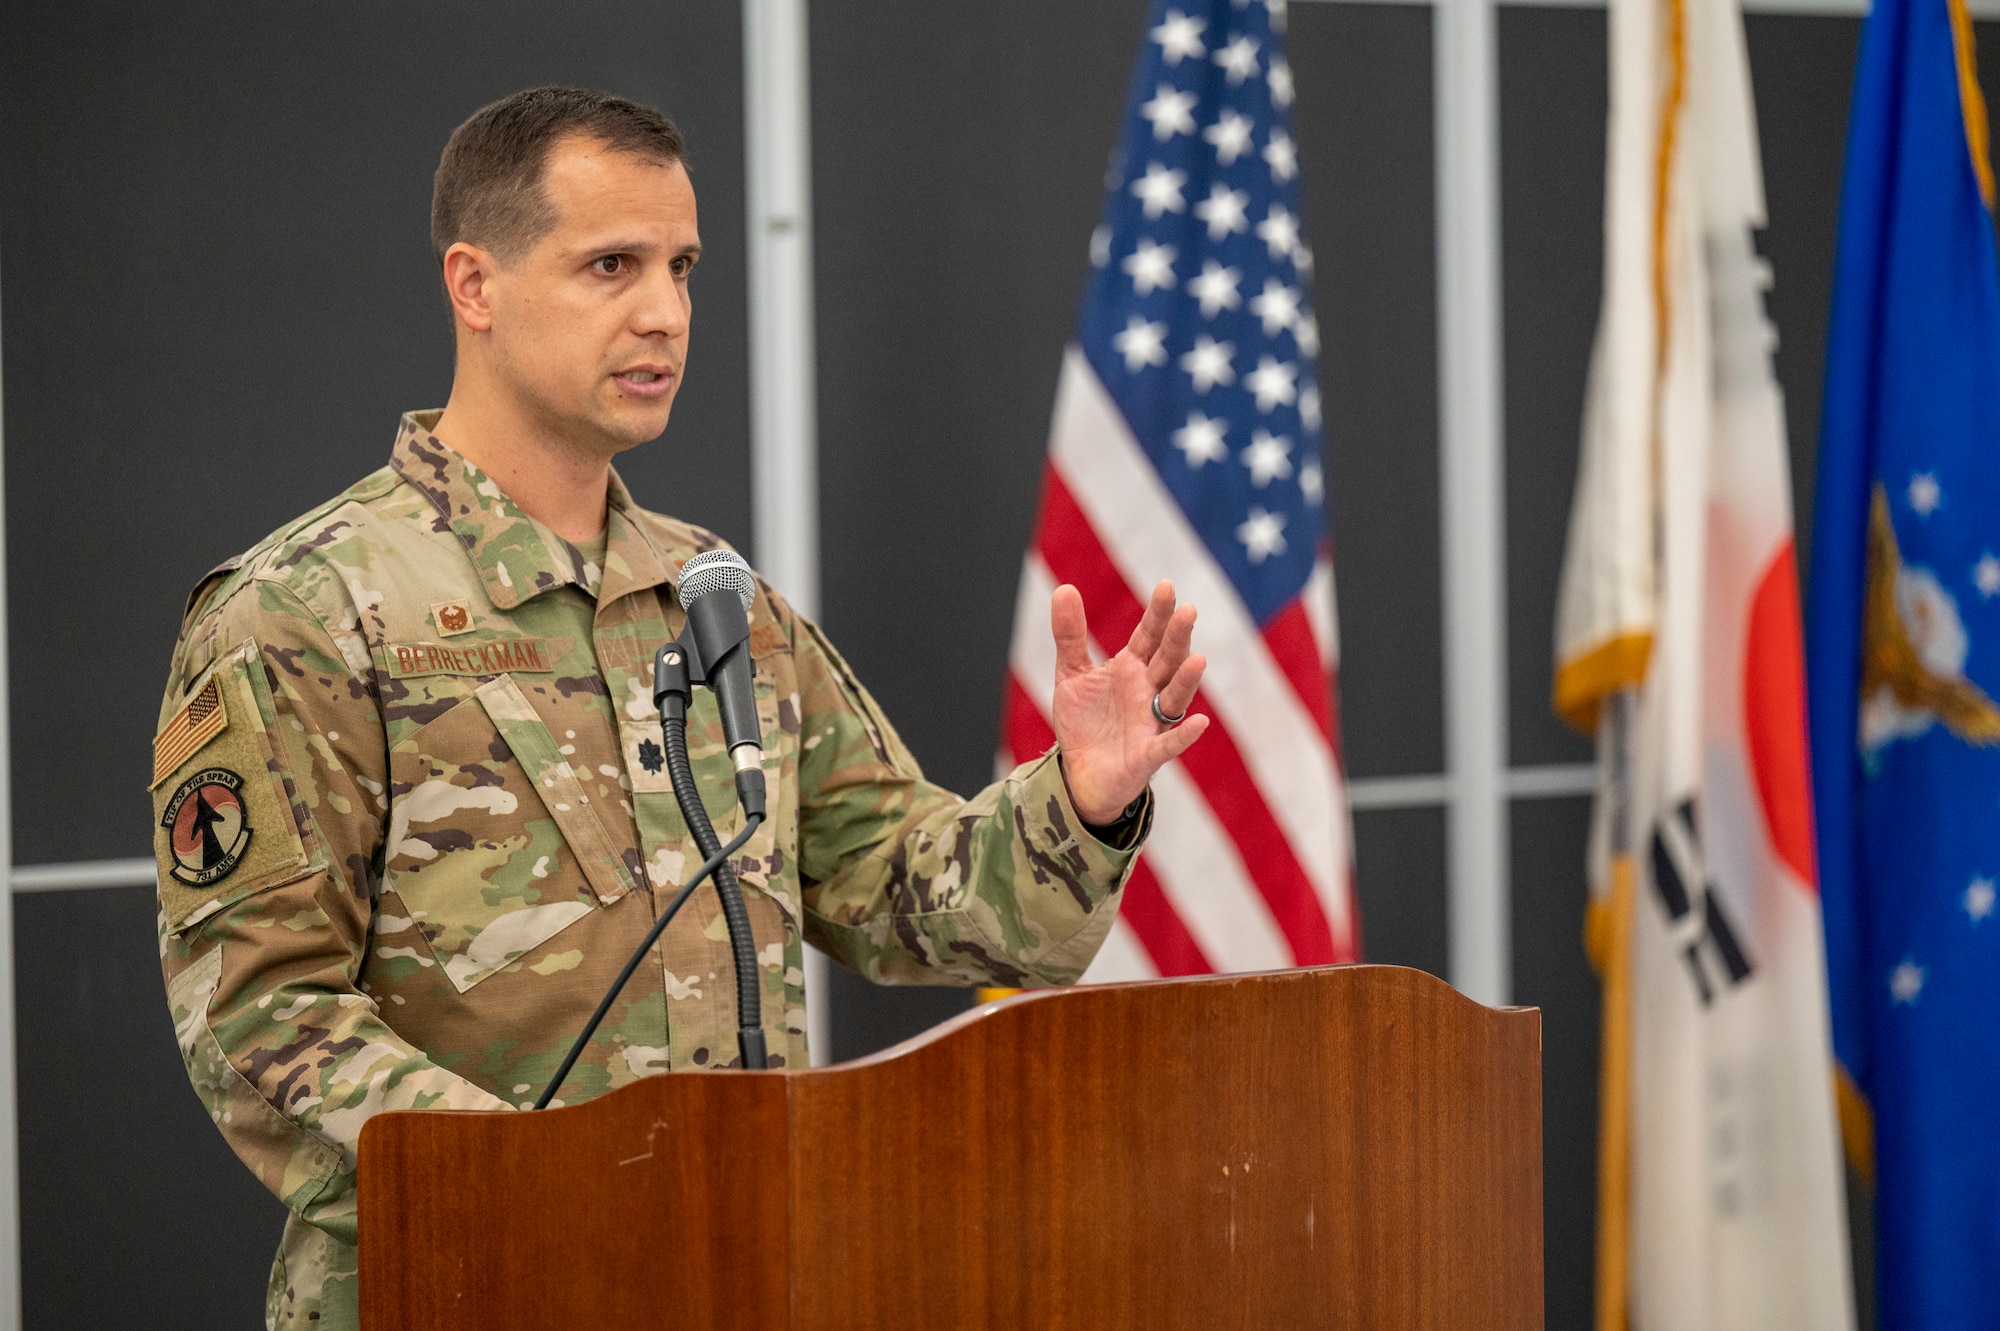 U.S. Air Force Lt. Col. Luke Berreckman, 731st Air Mobility Squadron incoming commander, gives his first speech to his squadron during a change of command ceremony at Osan Air Base, Republic of Korea, June 23, 2023. Change of command ceremonies are time-honored traditions deeply-rooted in American military history.  (U.S. Air Force photo by Senior Airman Aaron Edwards)